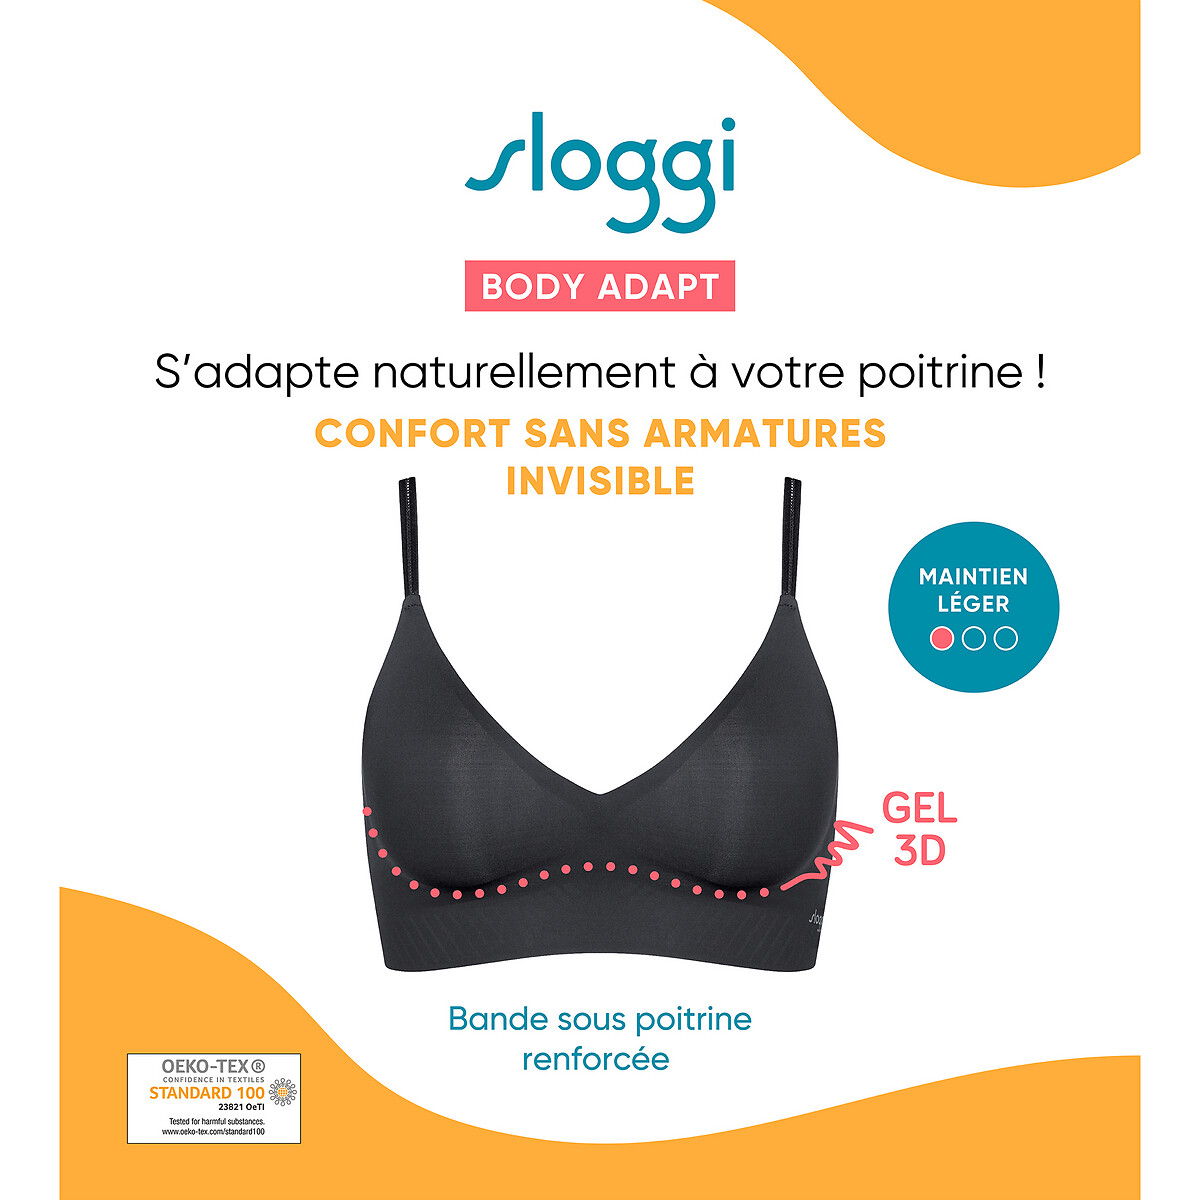 body adapt bralette with natural support